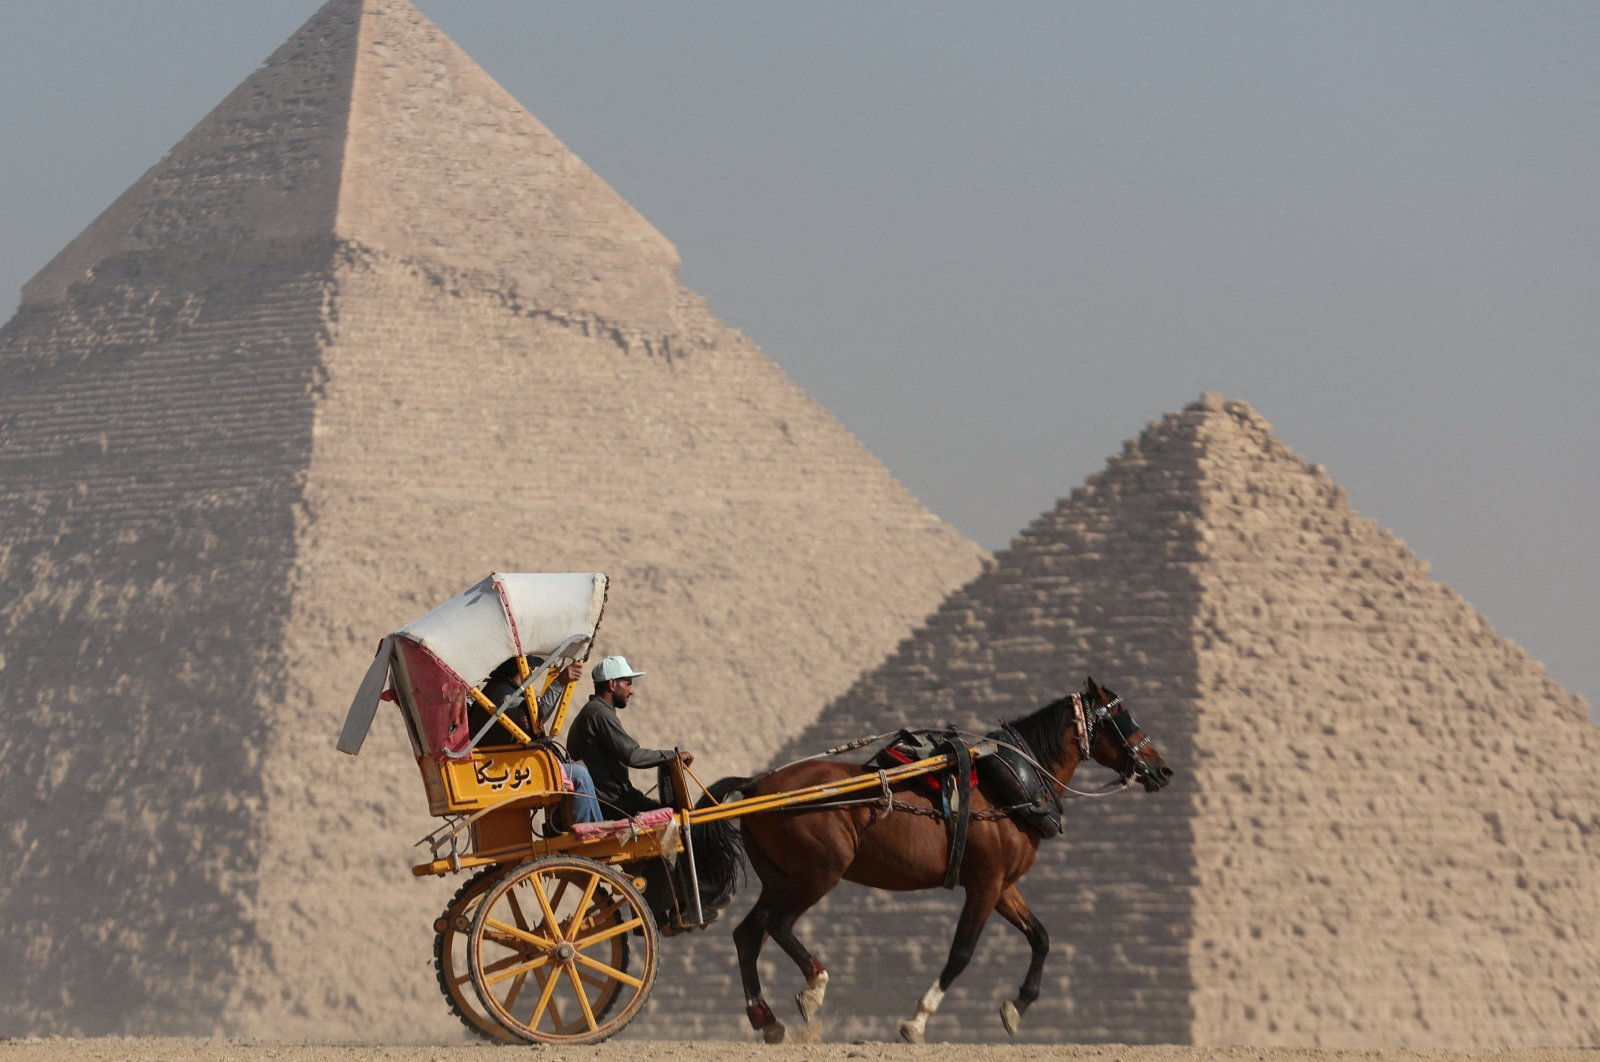 Tourists ride a horse-drawn cart in front of the Great Pyramids plateau in Giza, Egypt, Dec. 11, 2022. (Reuters Photo)